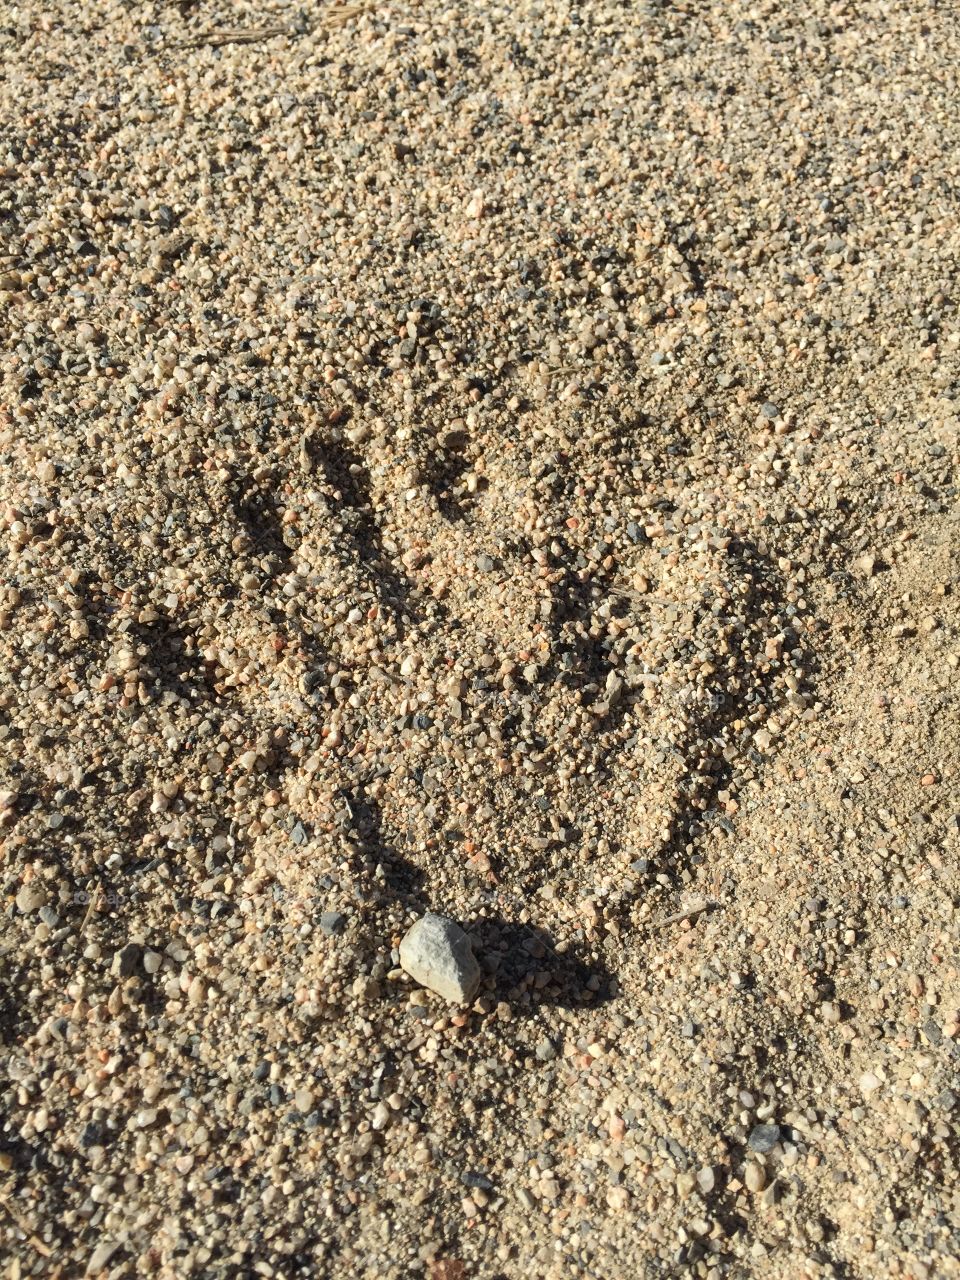 Handprint in the sand